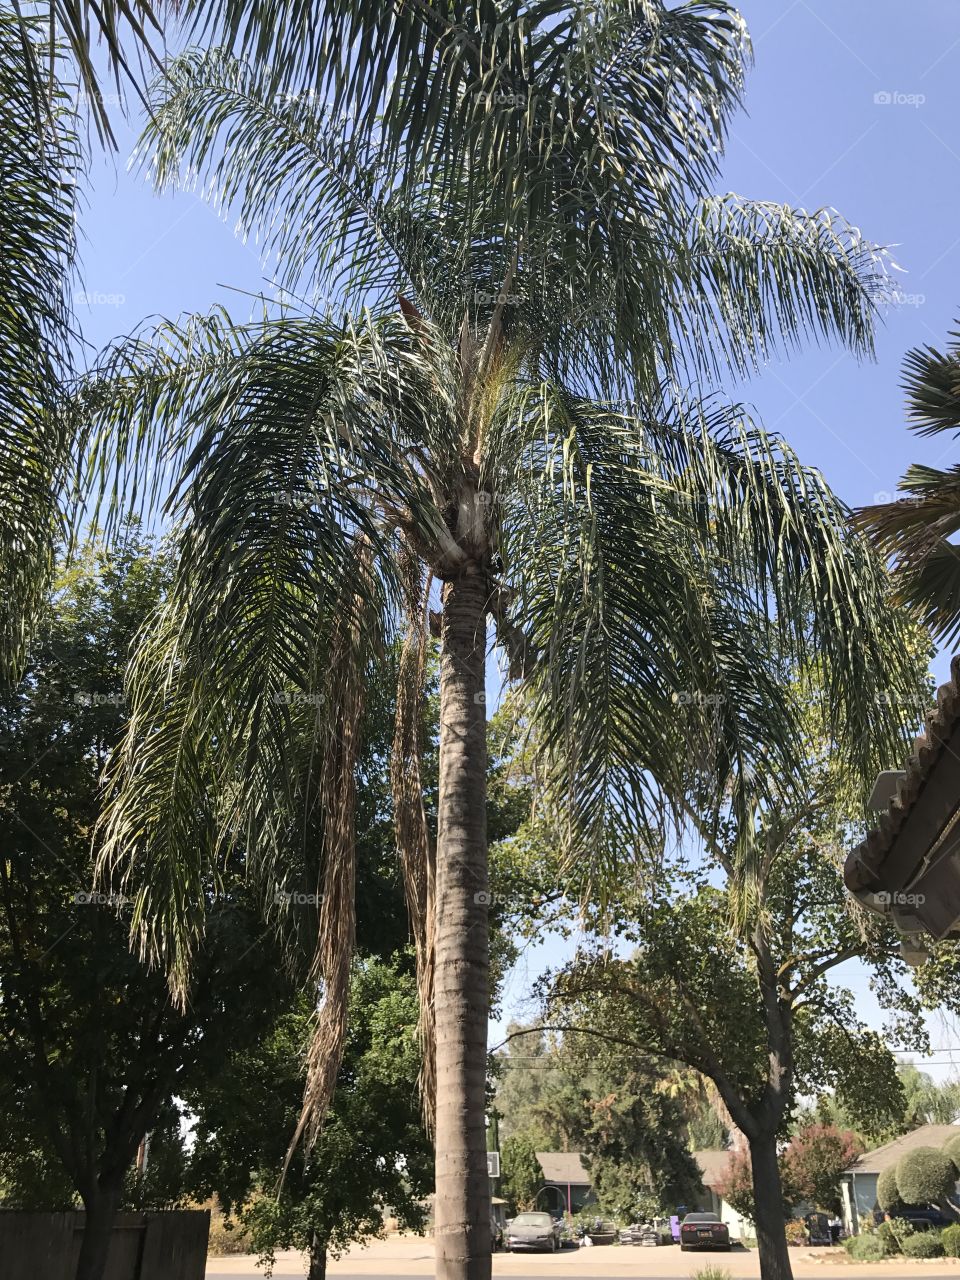 Tree, No Person, Palm, Travel, Outdoors